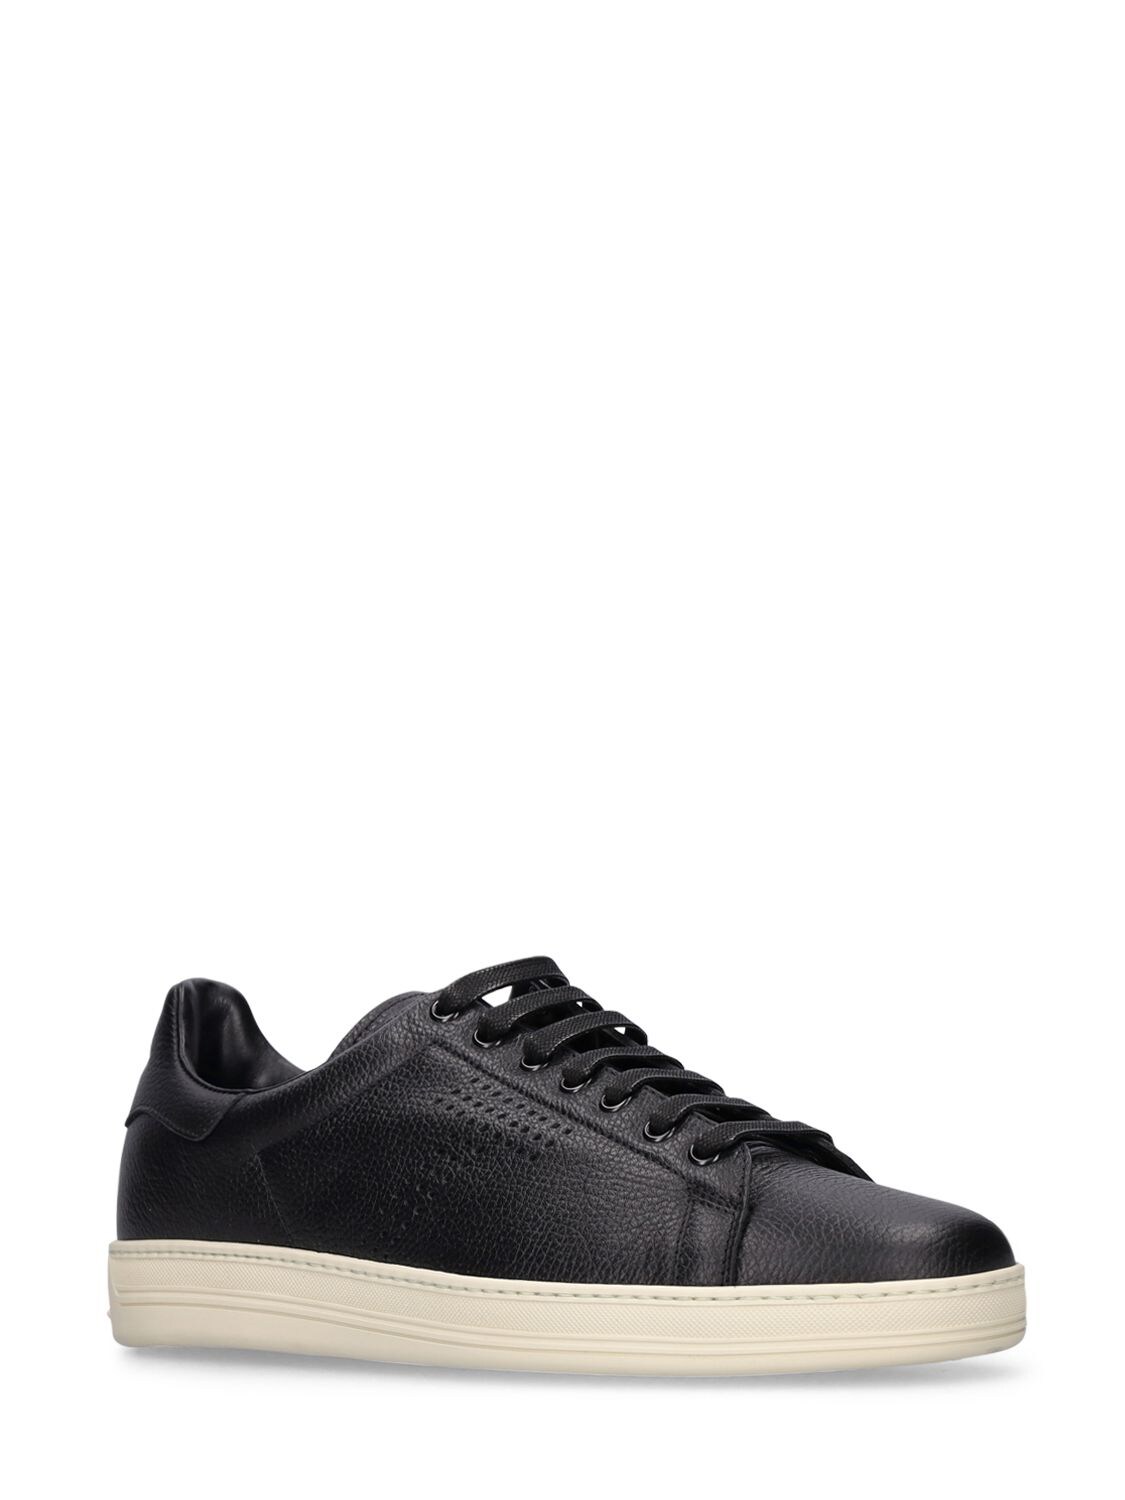 Shop Tom Ford Grain Leather Low Top Sneakers In Black